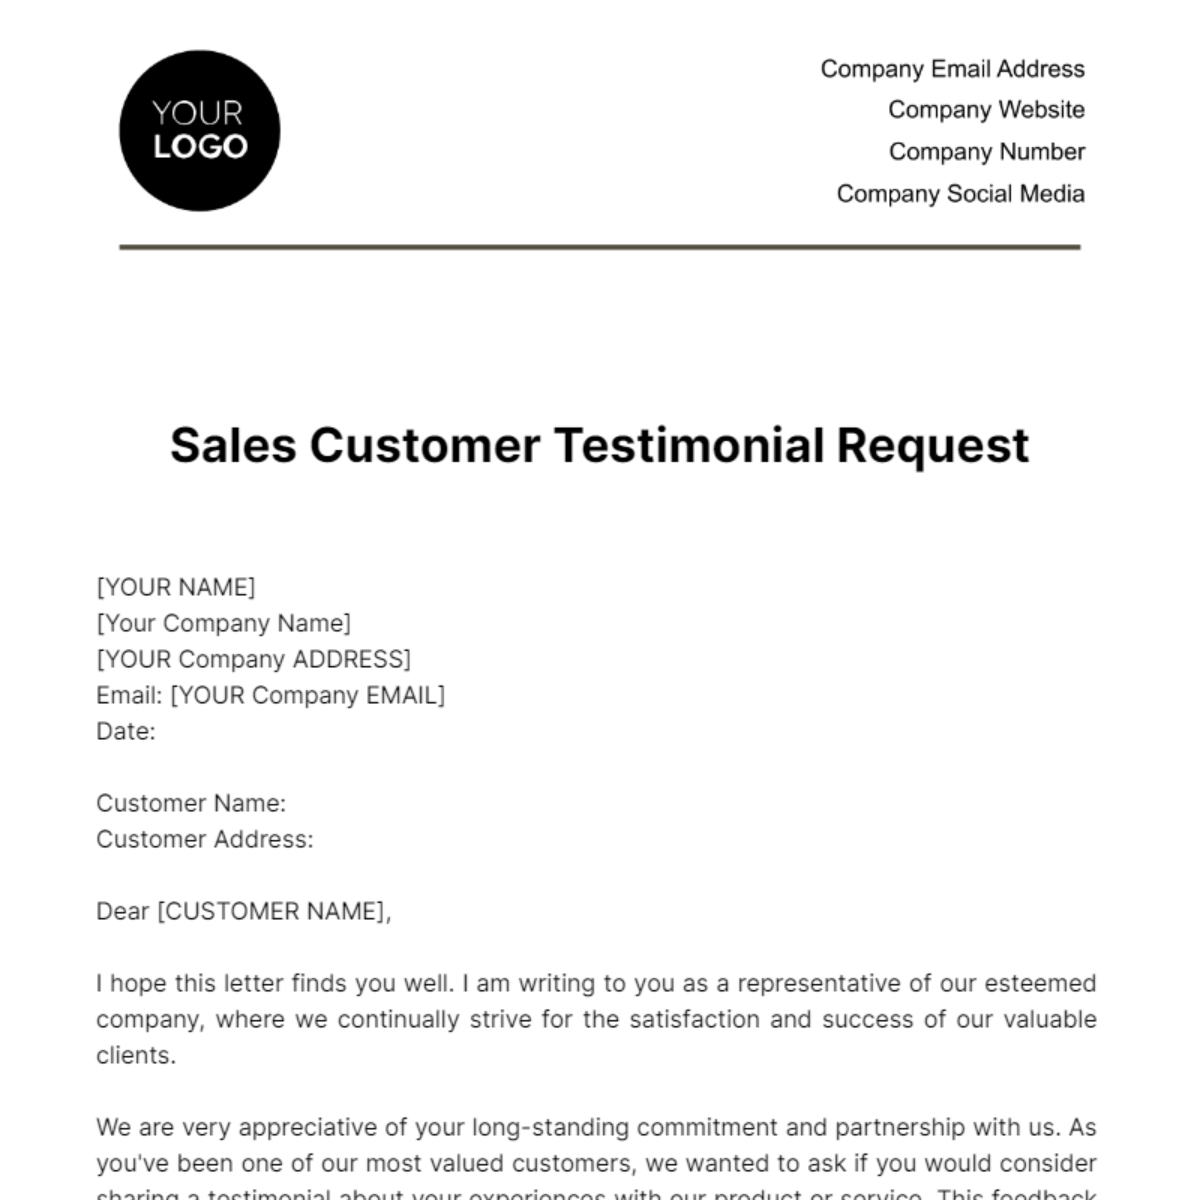 Free Sales Customer Testimonial Request Template